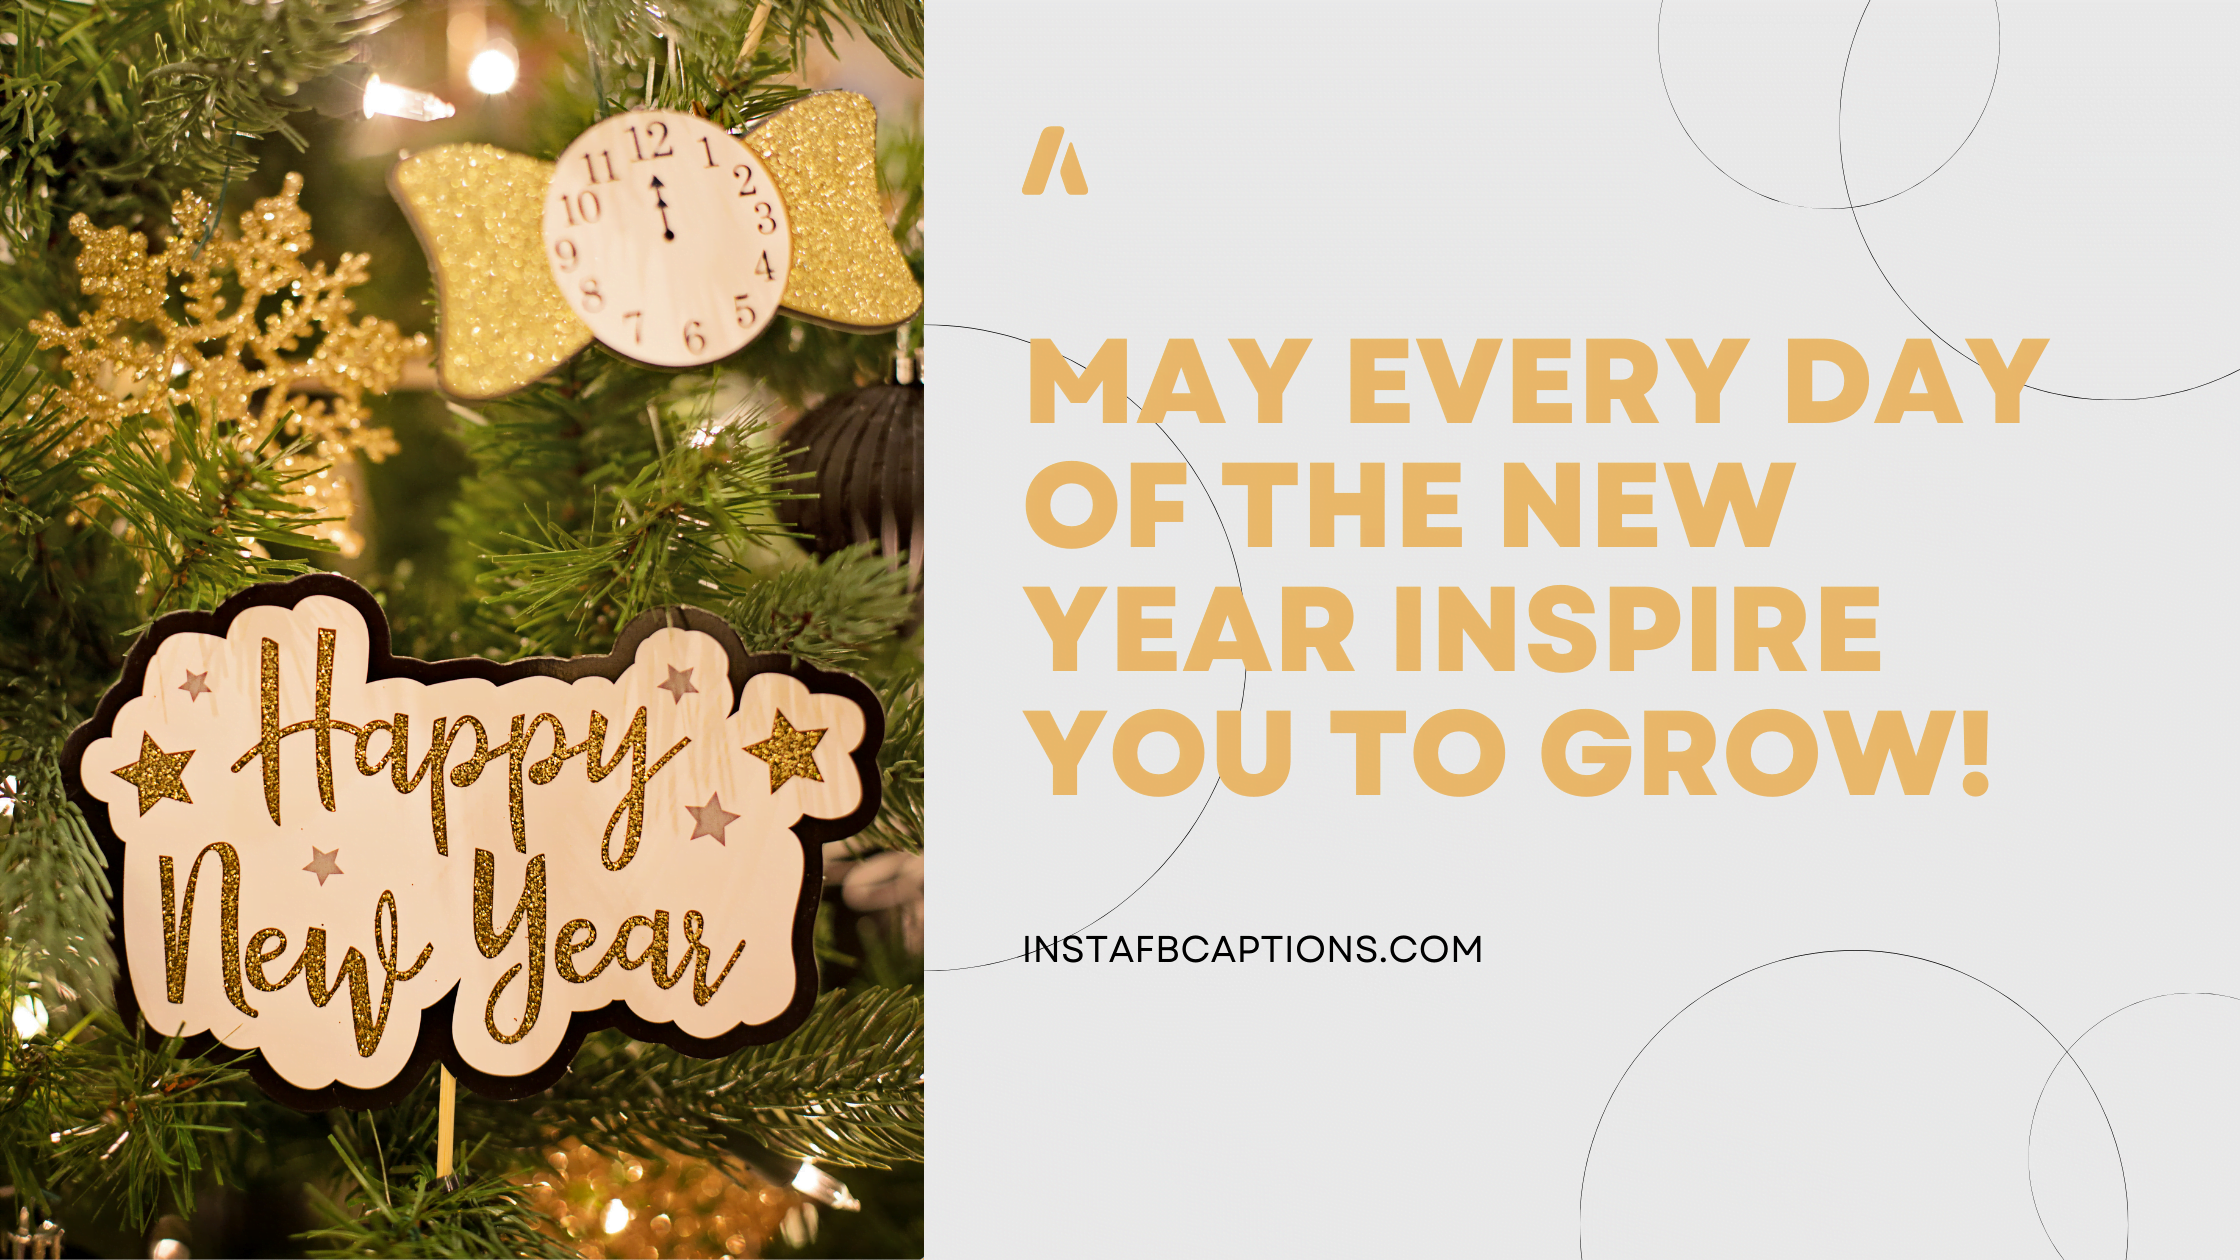 New Year Wishes And Captions  - New Year Wishes and Captions - [1000+] NEW YEAR 2023 Instagram Captions and Quotes